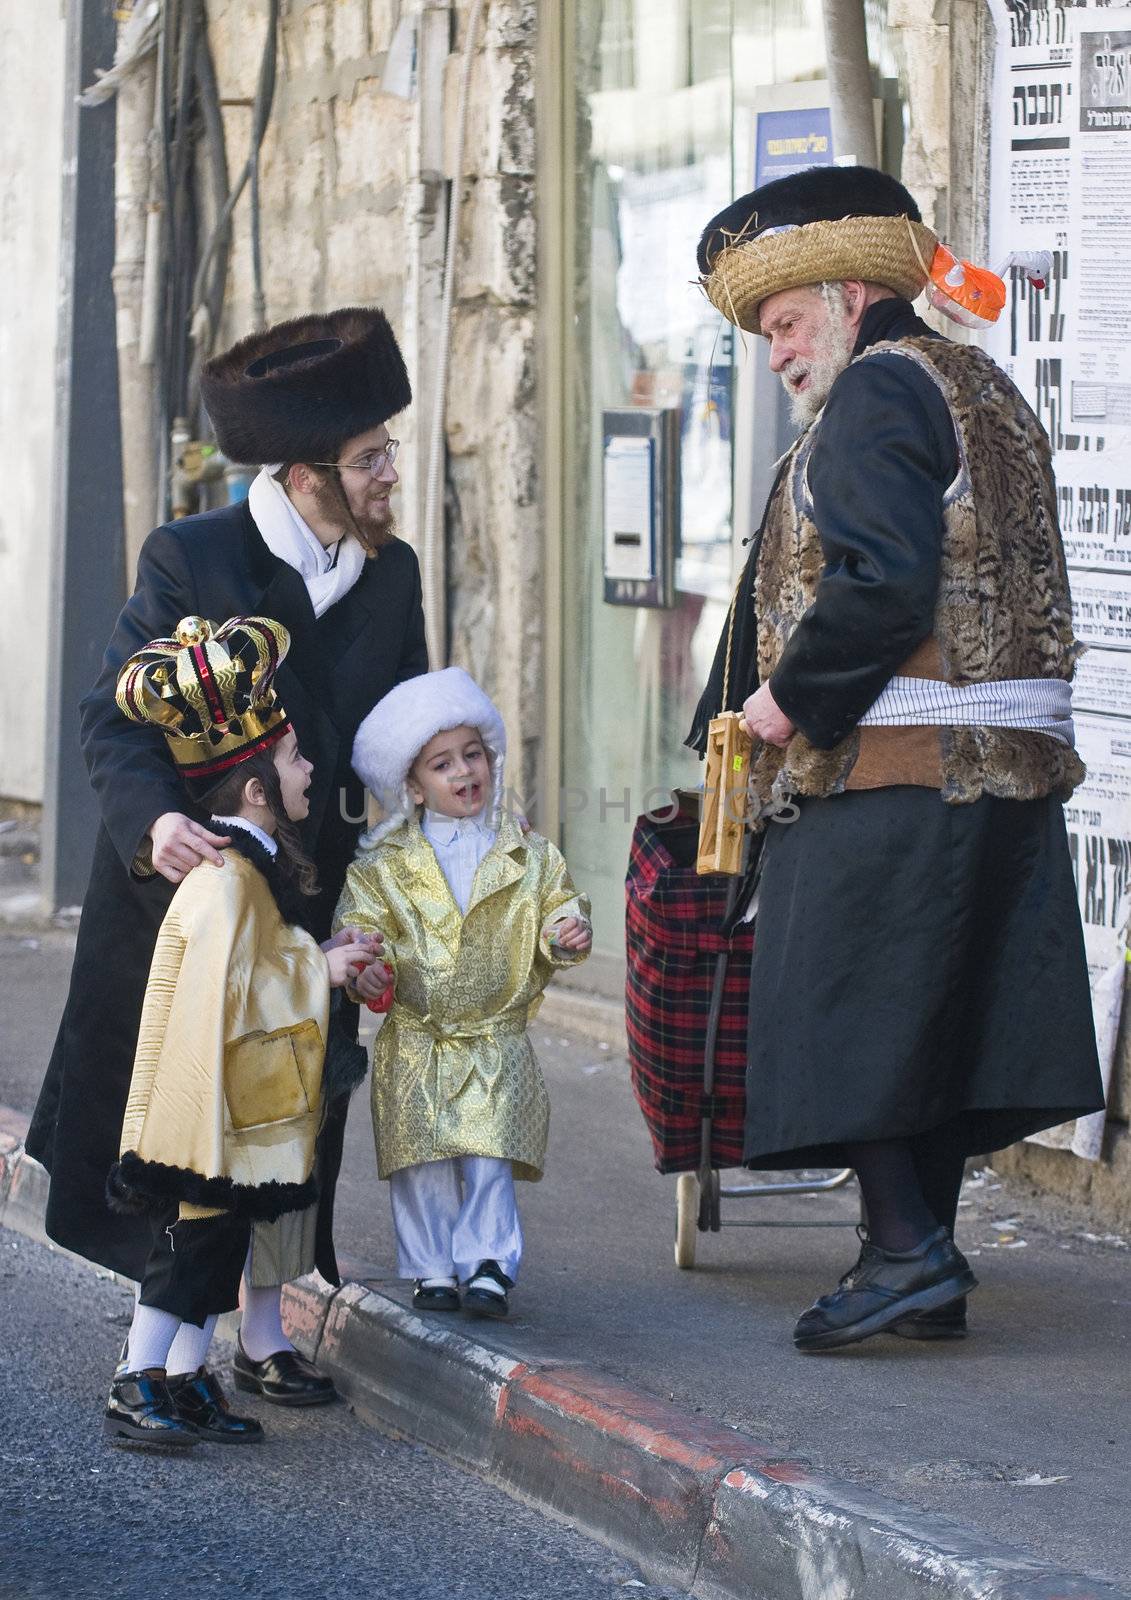 JERUSALEM - MARS 09 : Ultra Orthodox man give presents to a children during Purim in Mea Shearim Jerusalem on Mars 09 2012 , Giving presents to children is a tradition of Purim